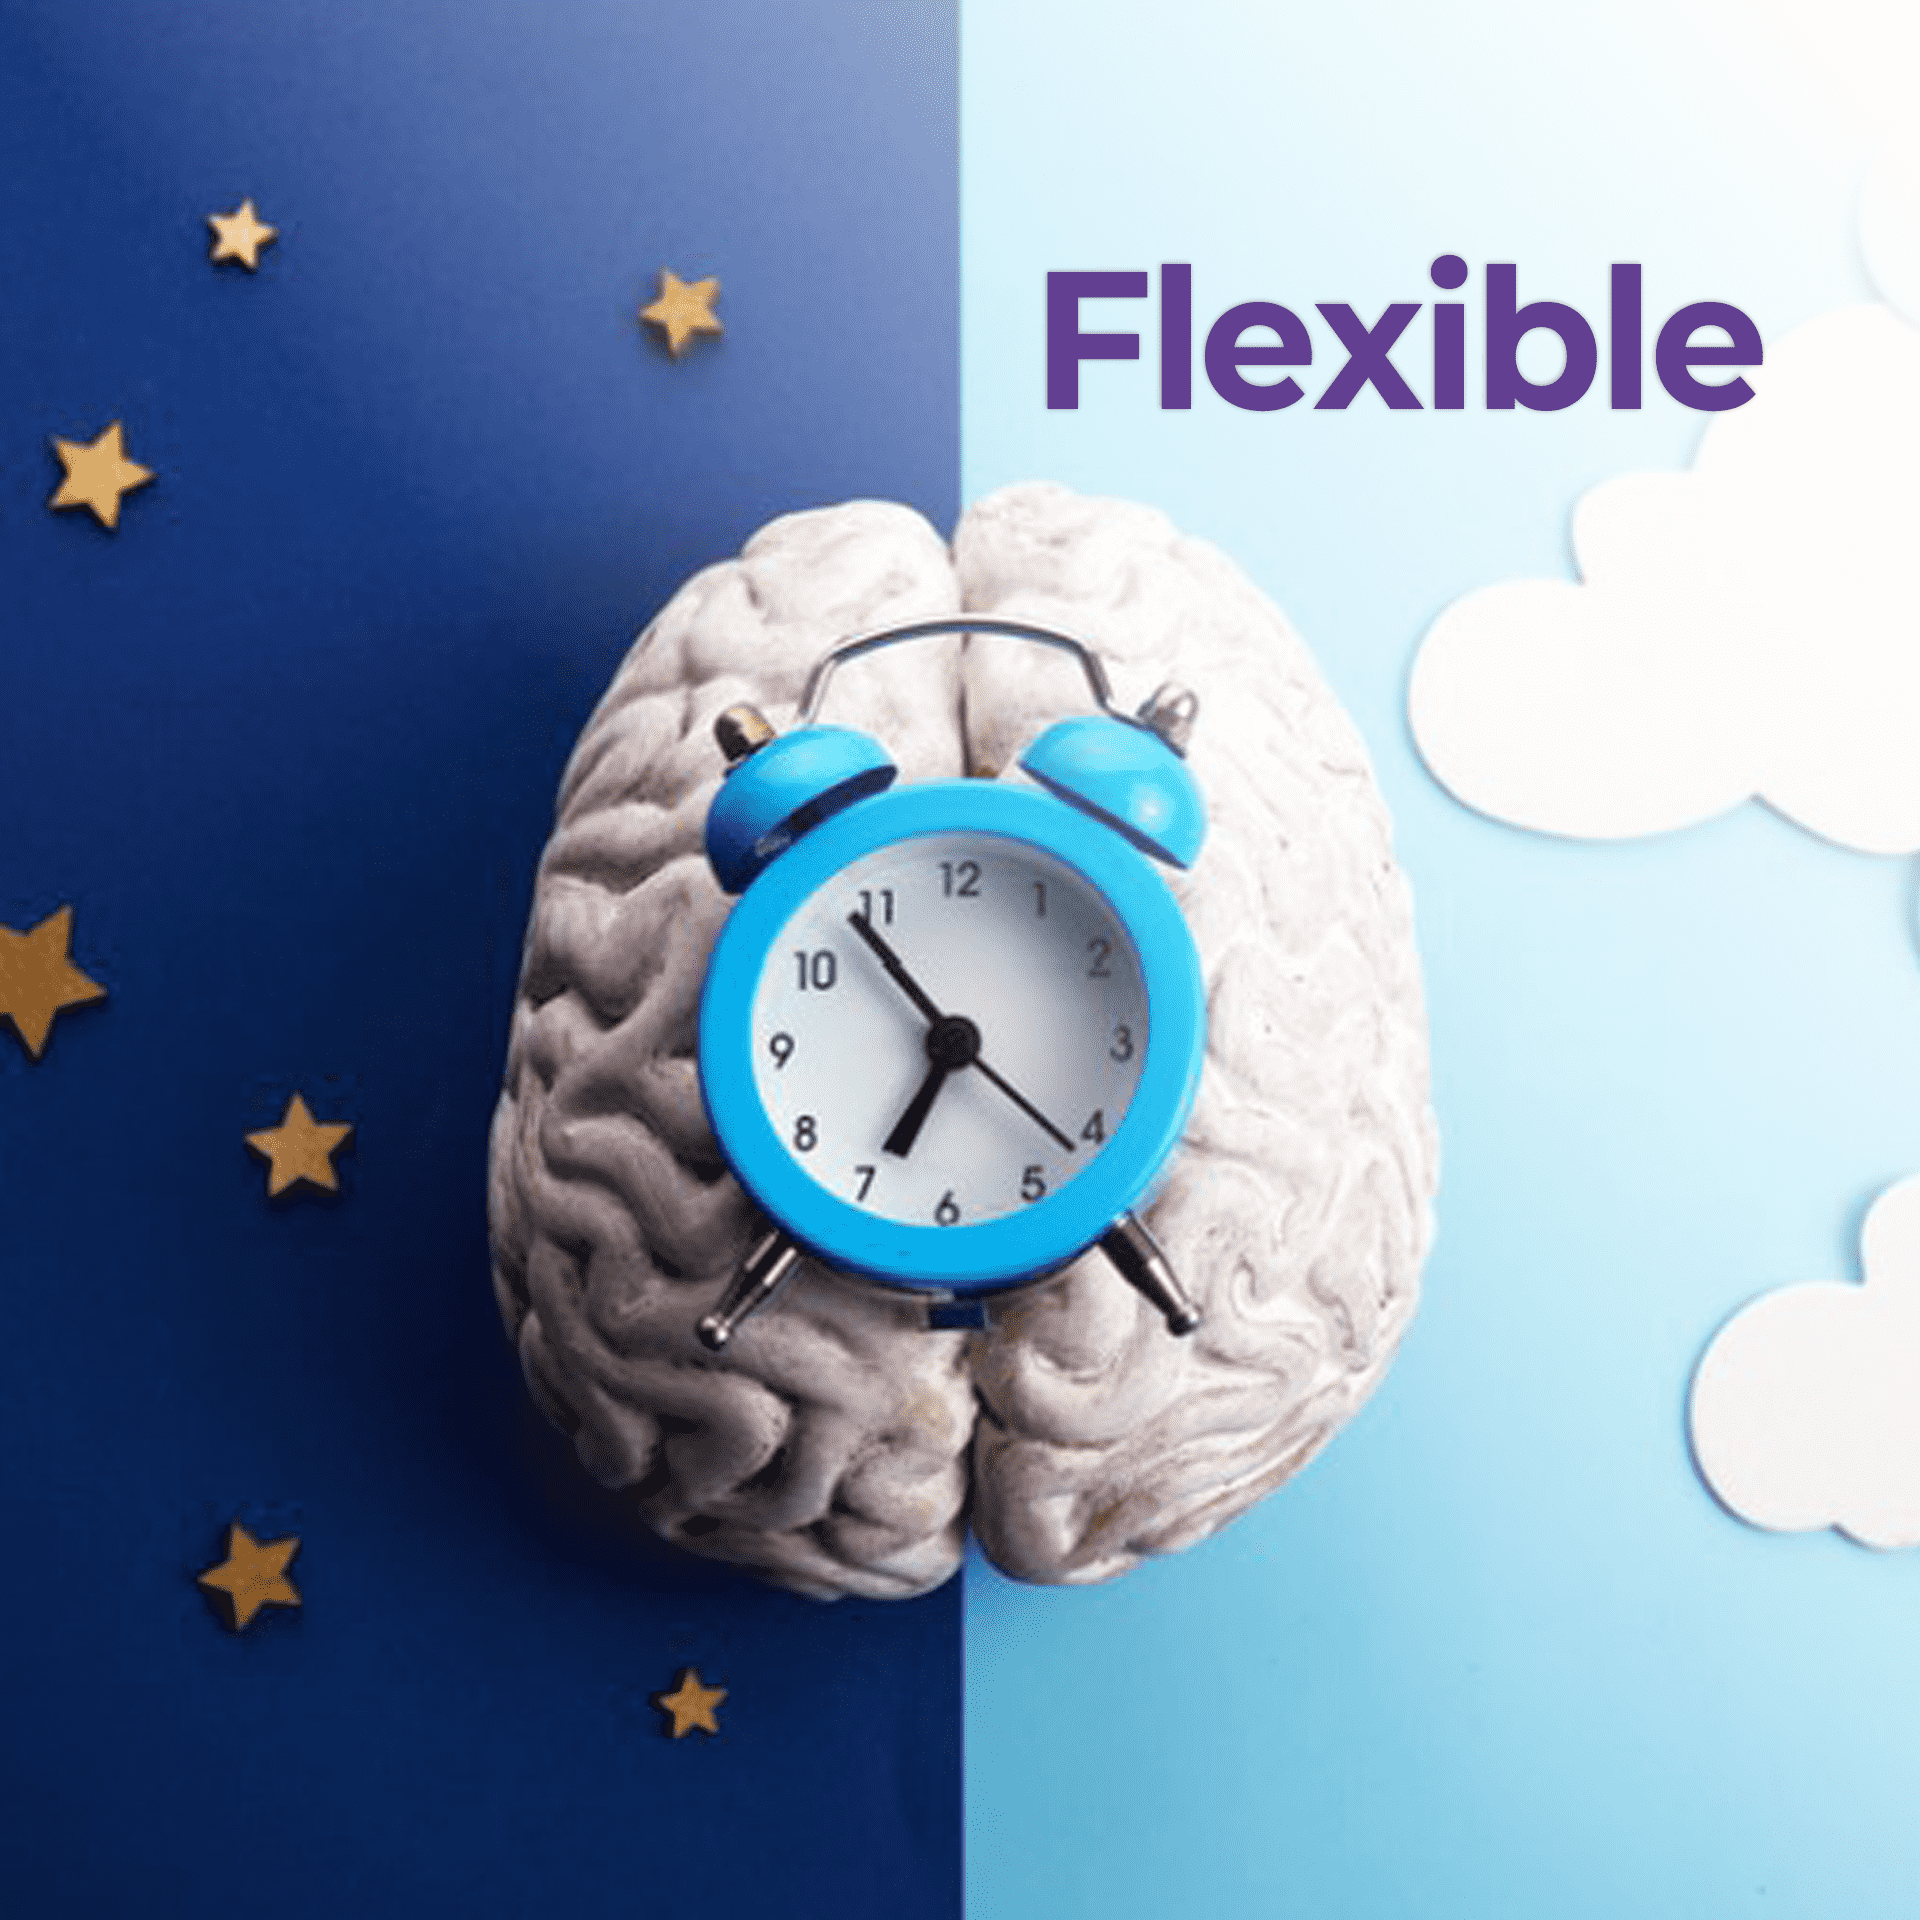 Career_3Images_Flexible